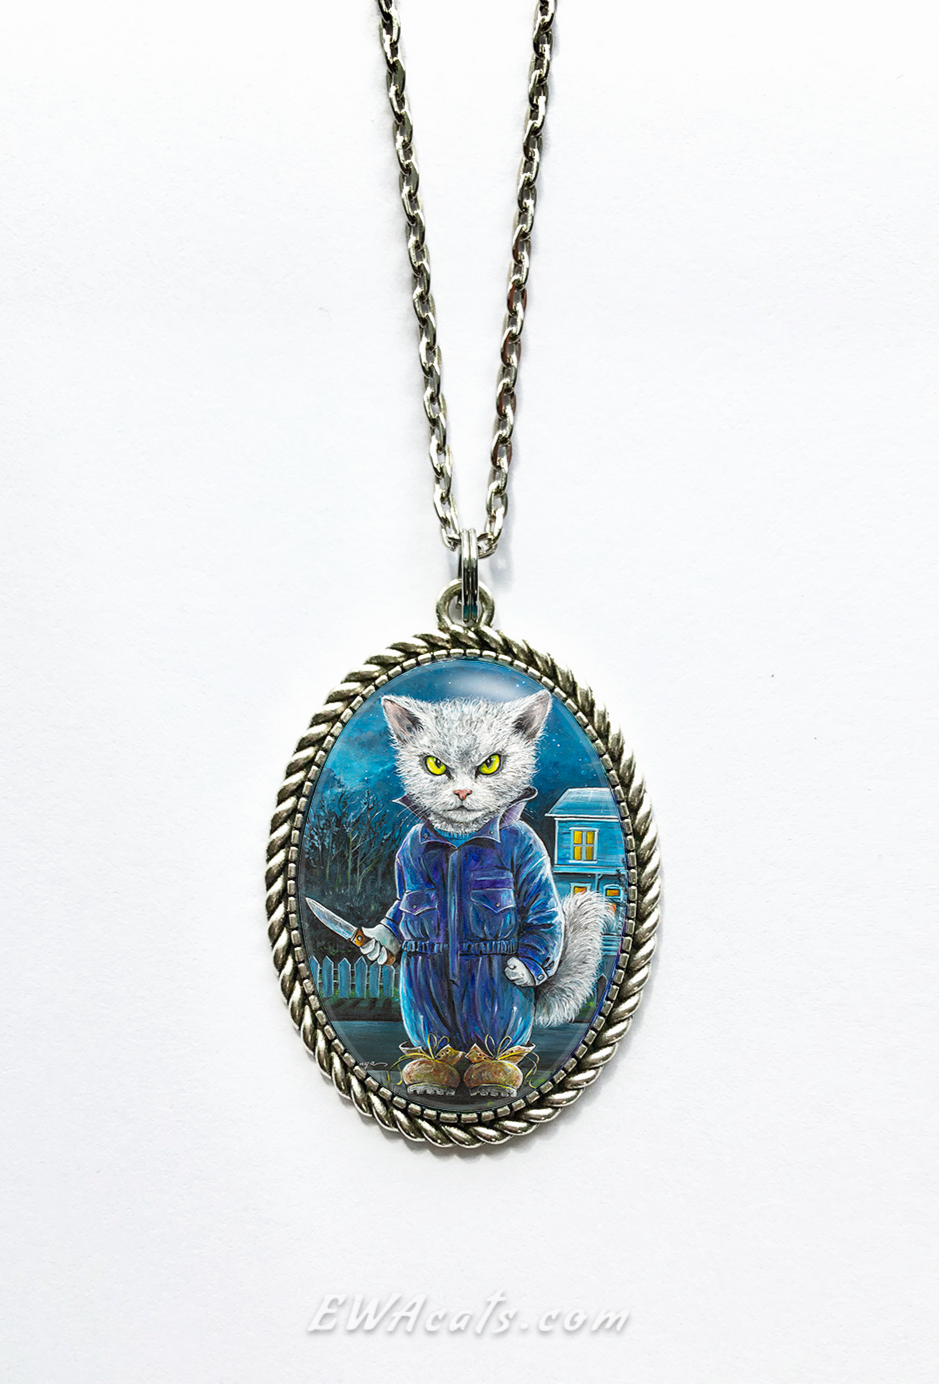 Necklace "Michael Meowers"